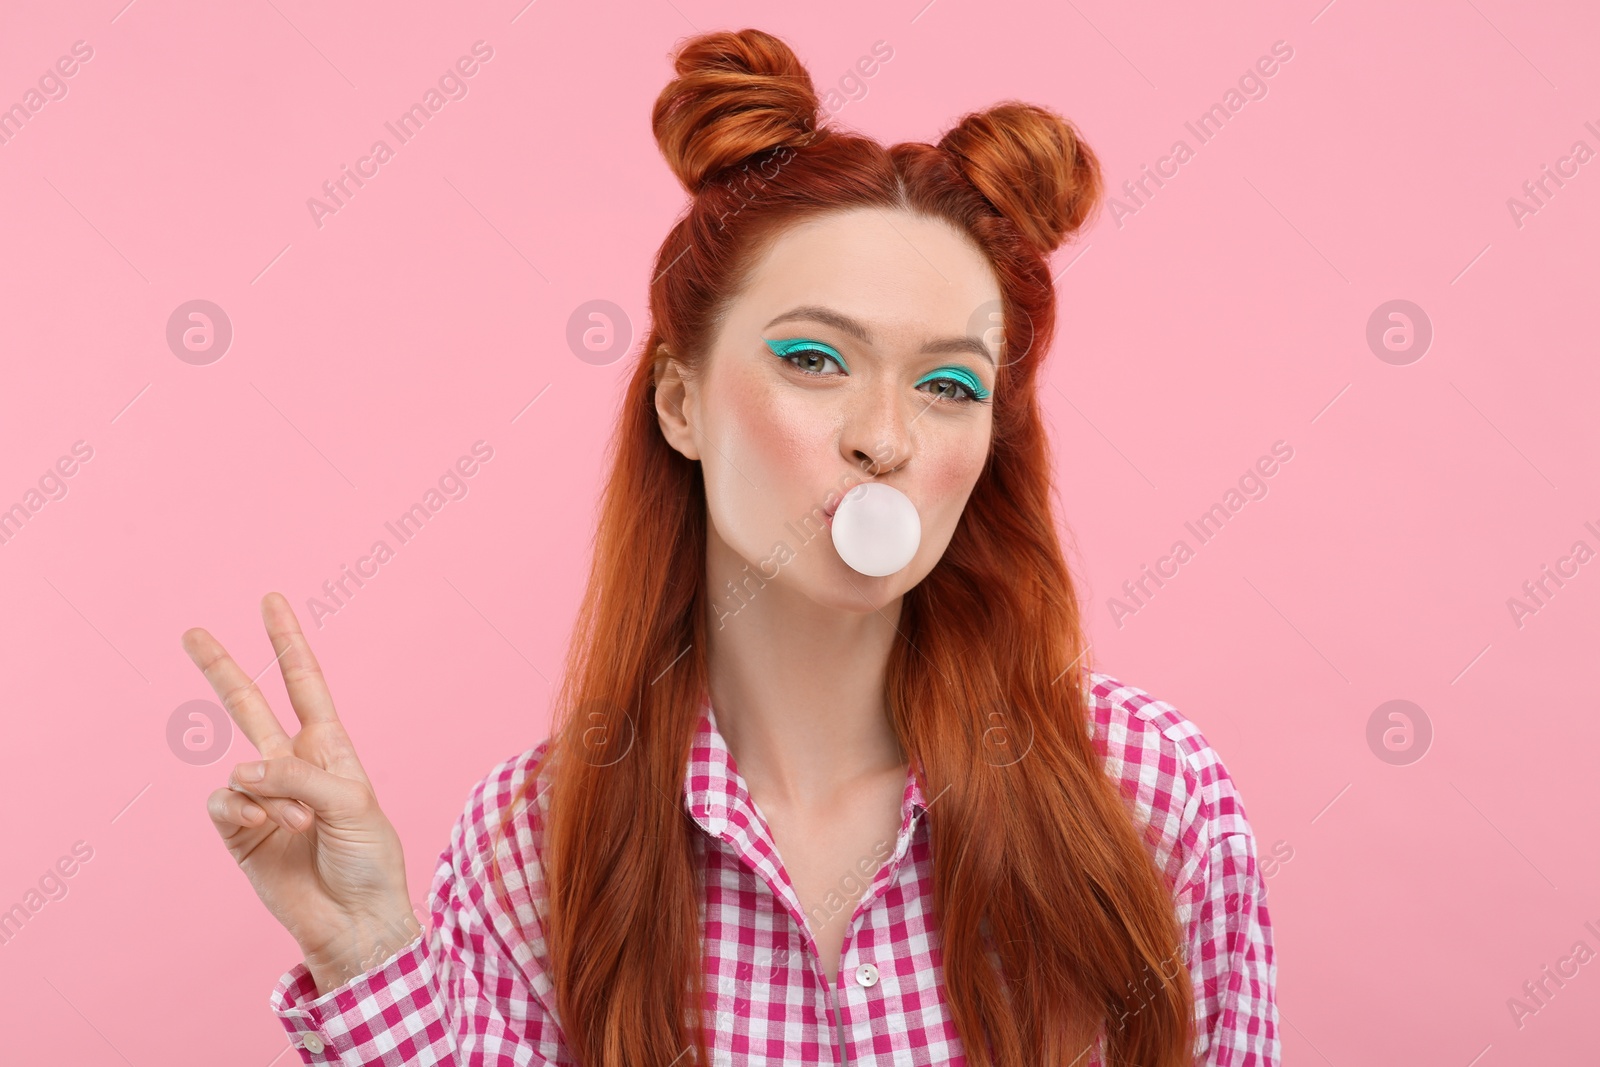 Photo of Portrait of beautiful woman with bright makeup blowing bubble gum and showing peace gesture on pink background